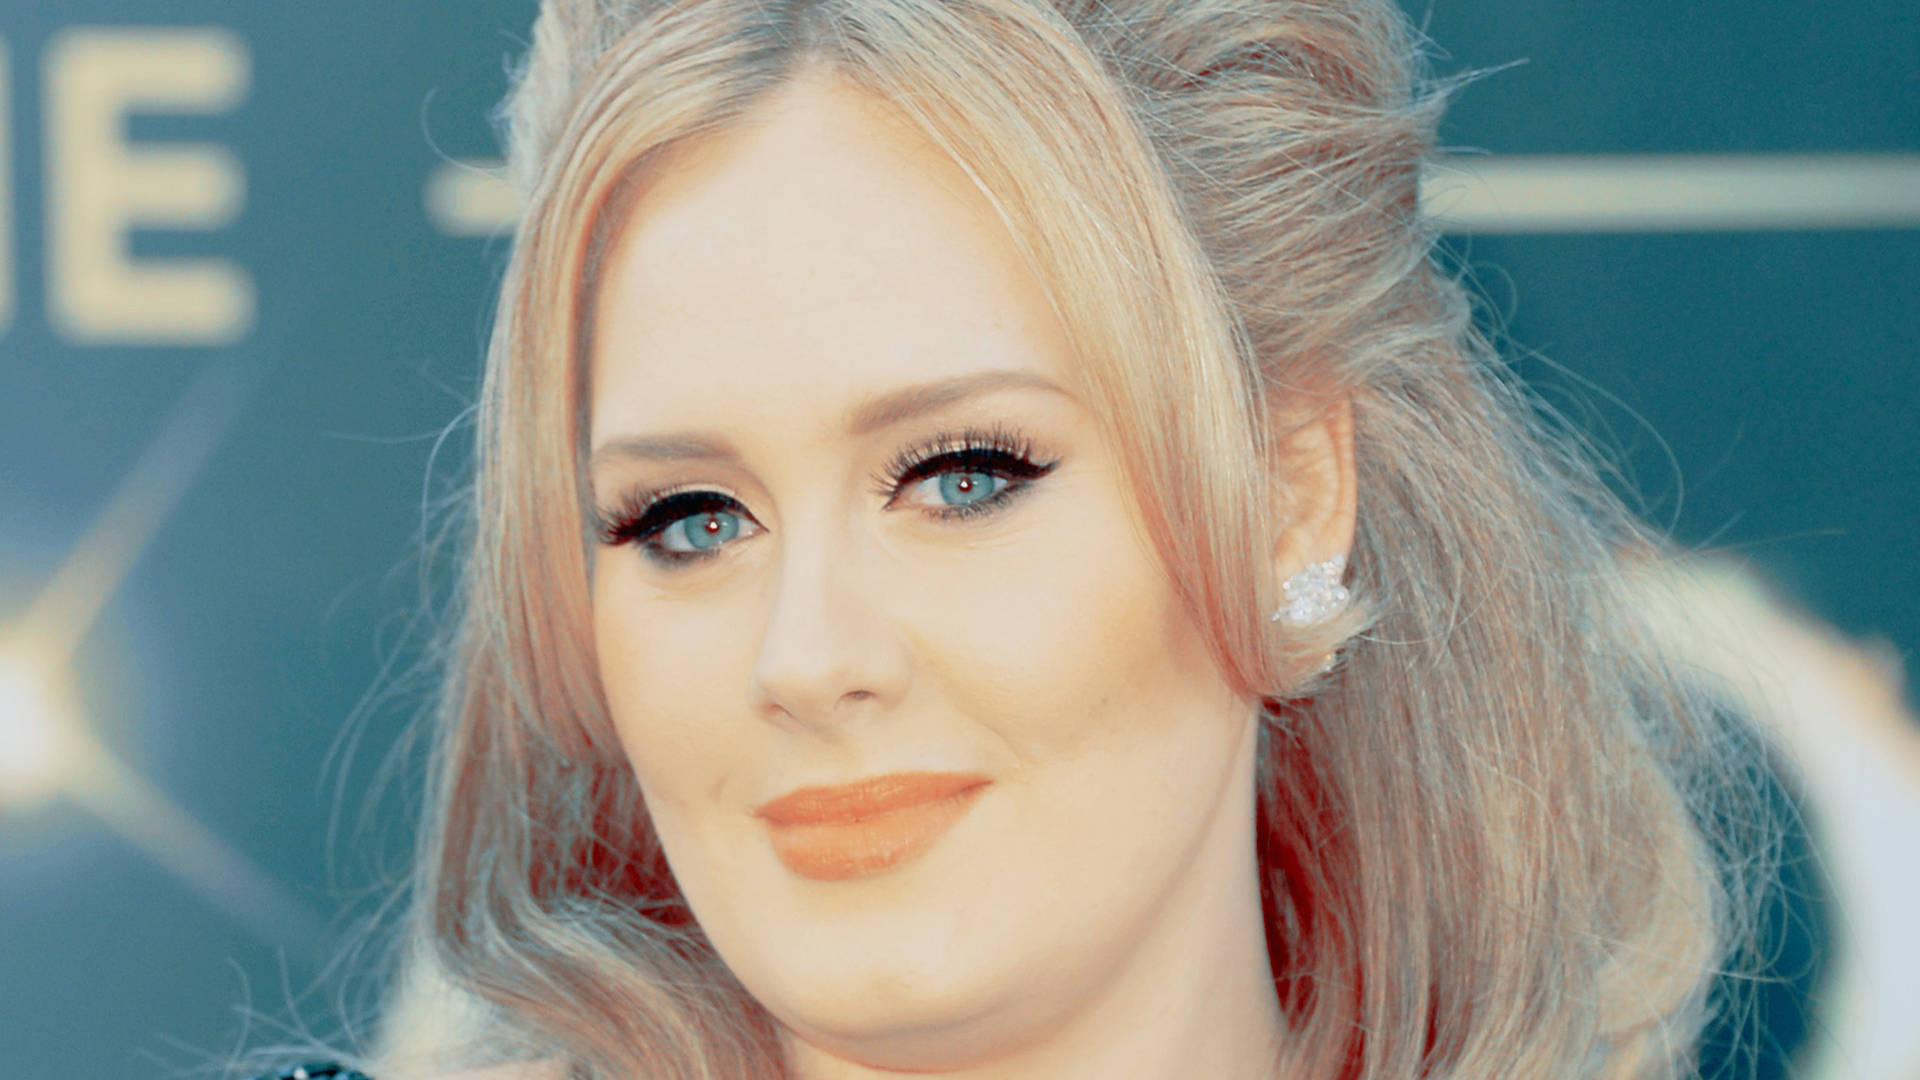 Free Adele Wallpaper Downloads, [100+] Adele Wallpapers for FREE |  